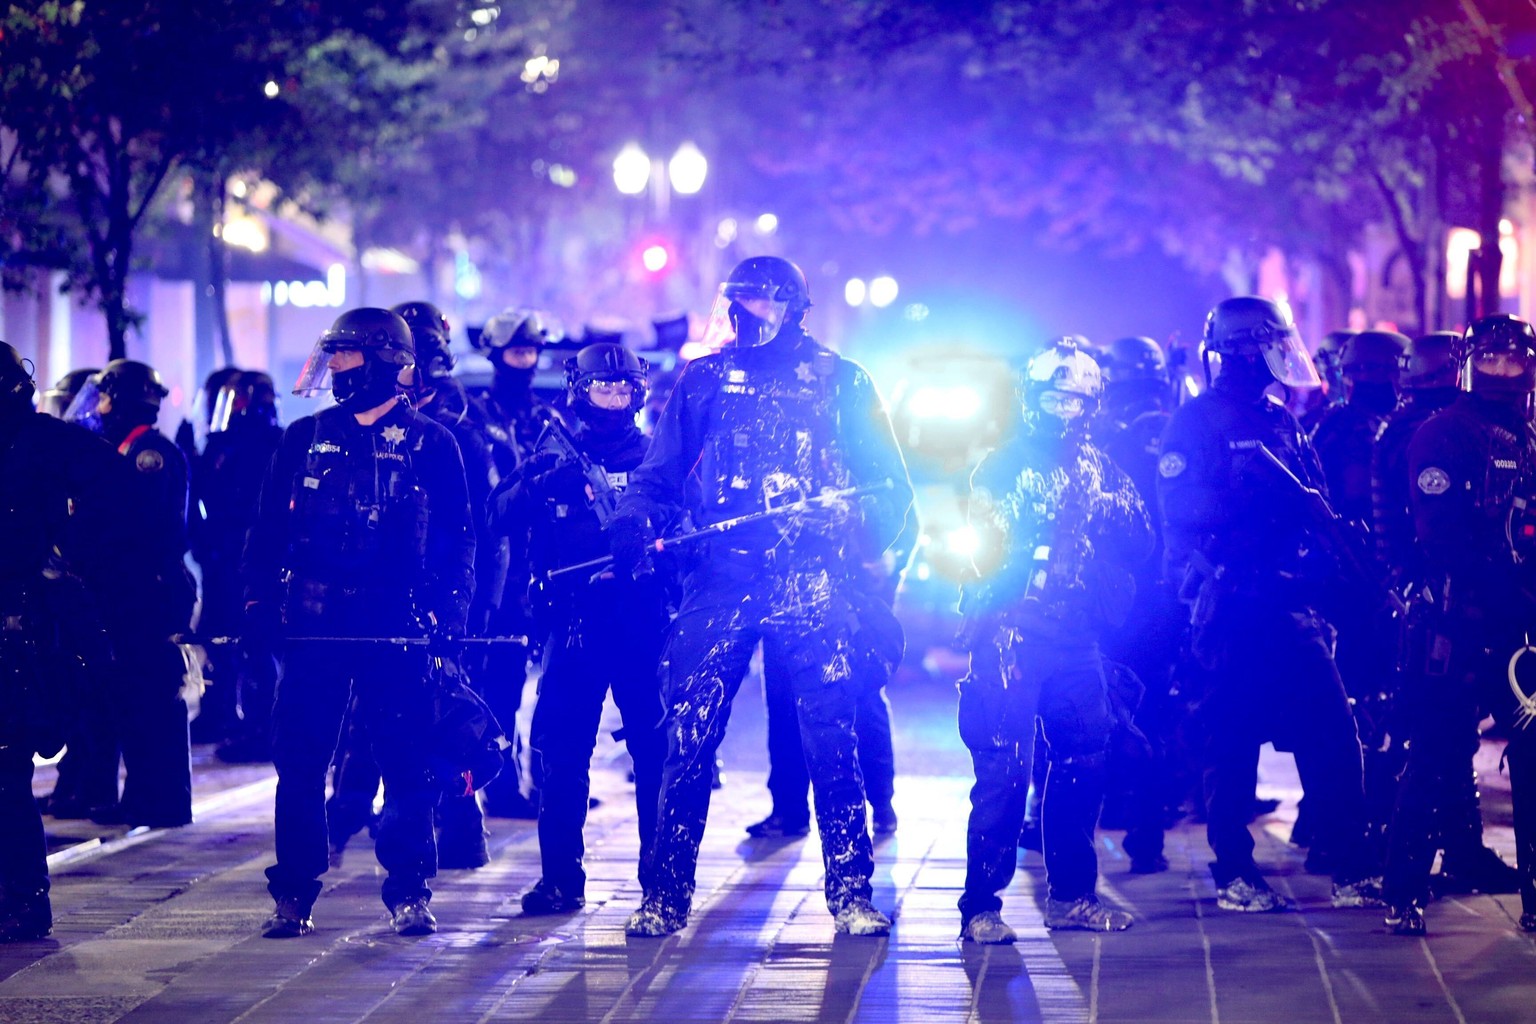 Portland Police and protesters clashed in a demonstration in downtown Portland, Wednesday, Aug. 12, 2020. Officers used tear gas to break up the crowd of several hundred people who gathered near the M ...